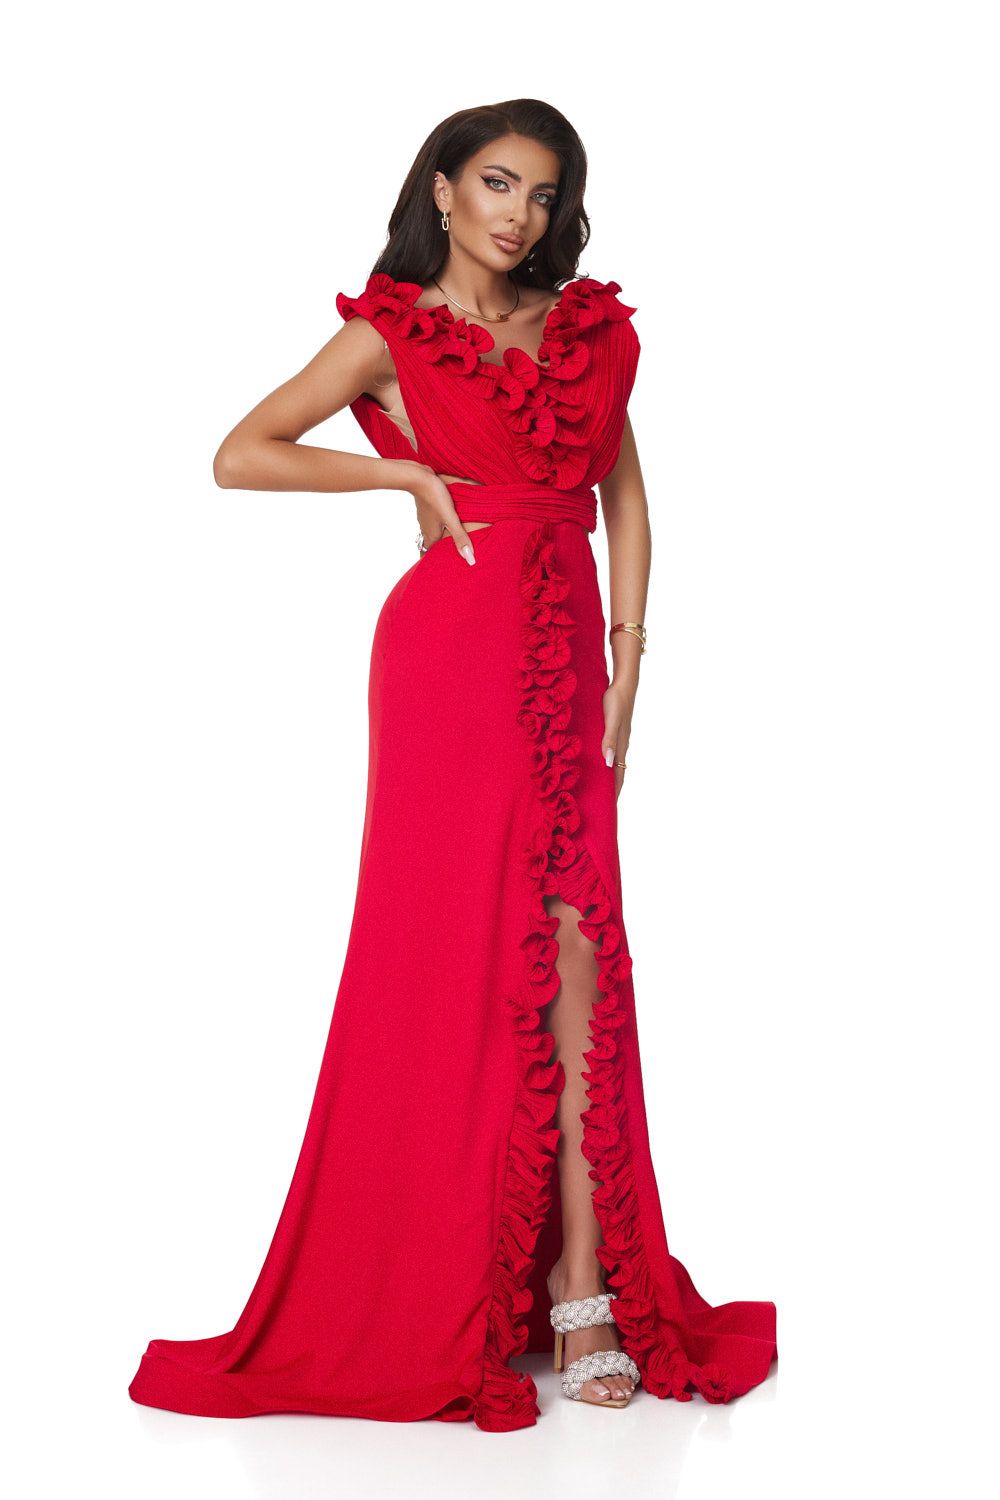 Long red dress for women by Zapissa Bogas